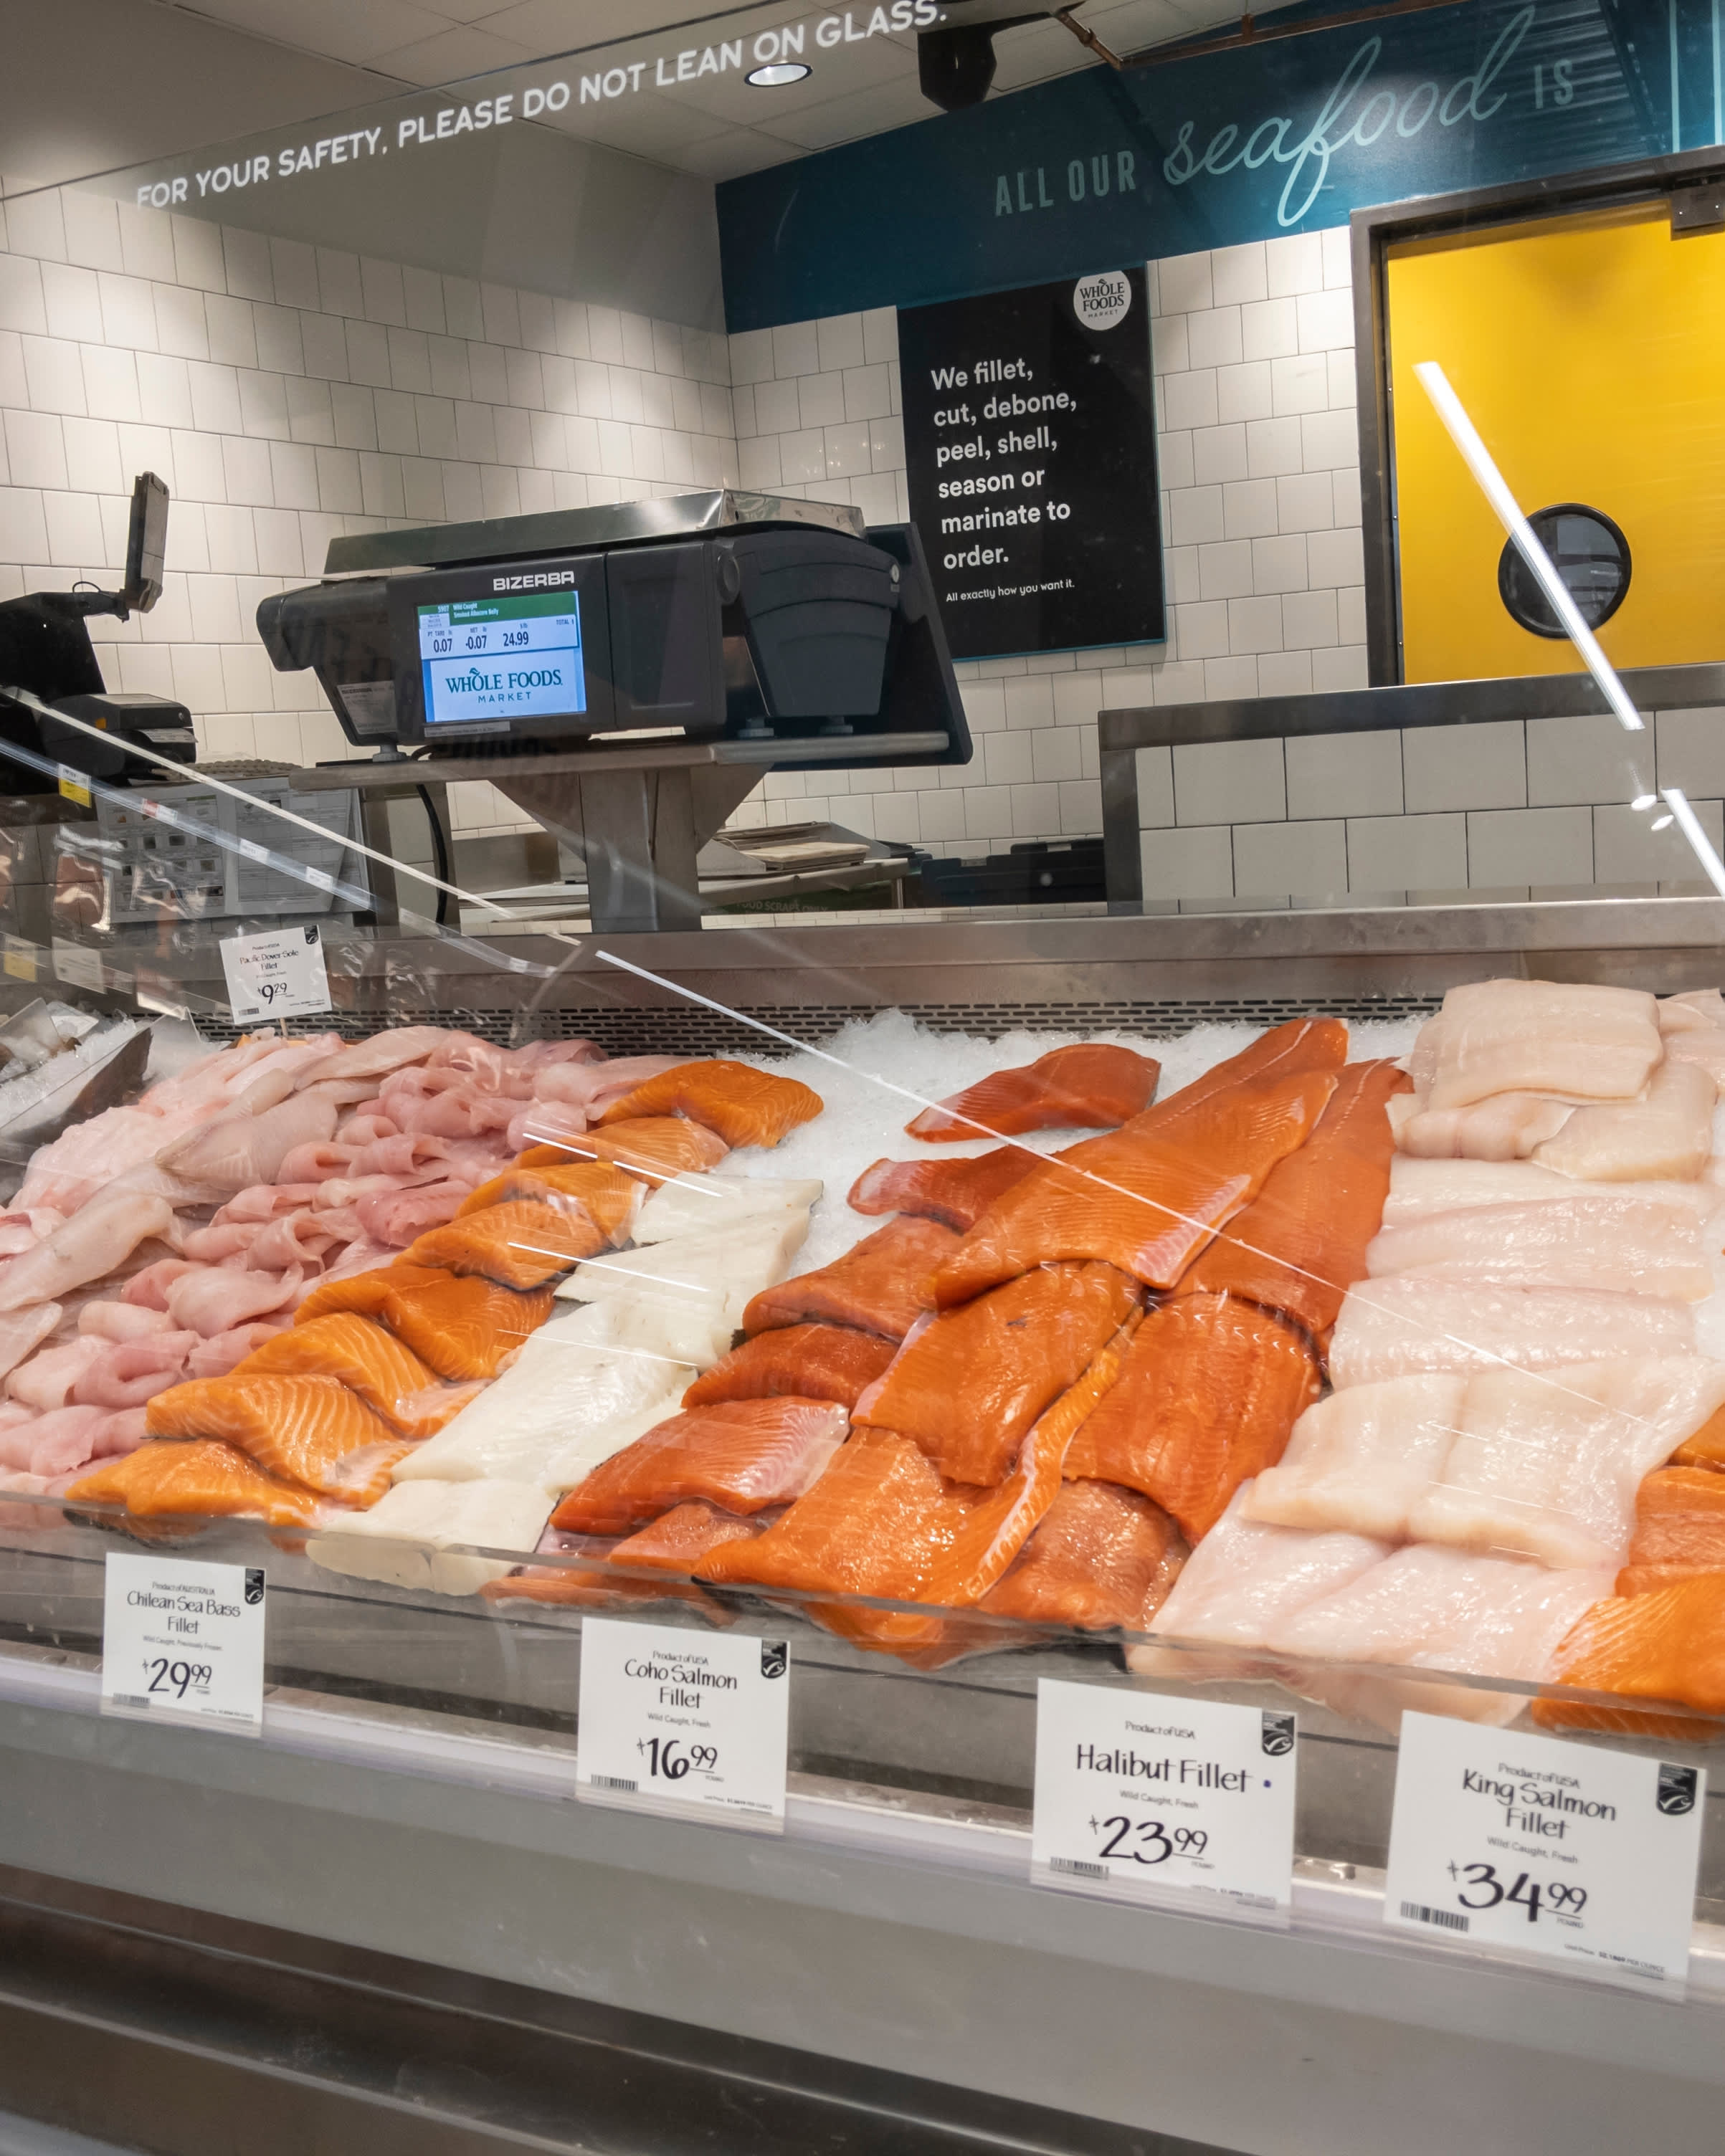 King Salmon Fillet at Whole Foods Market